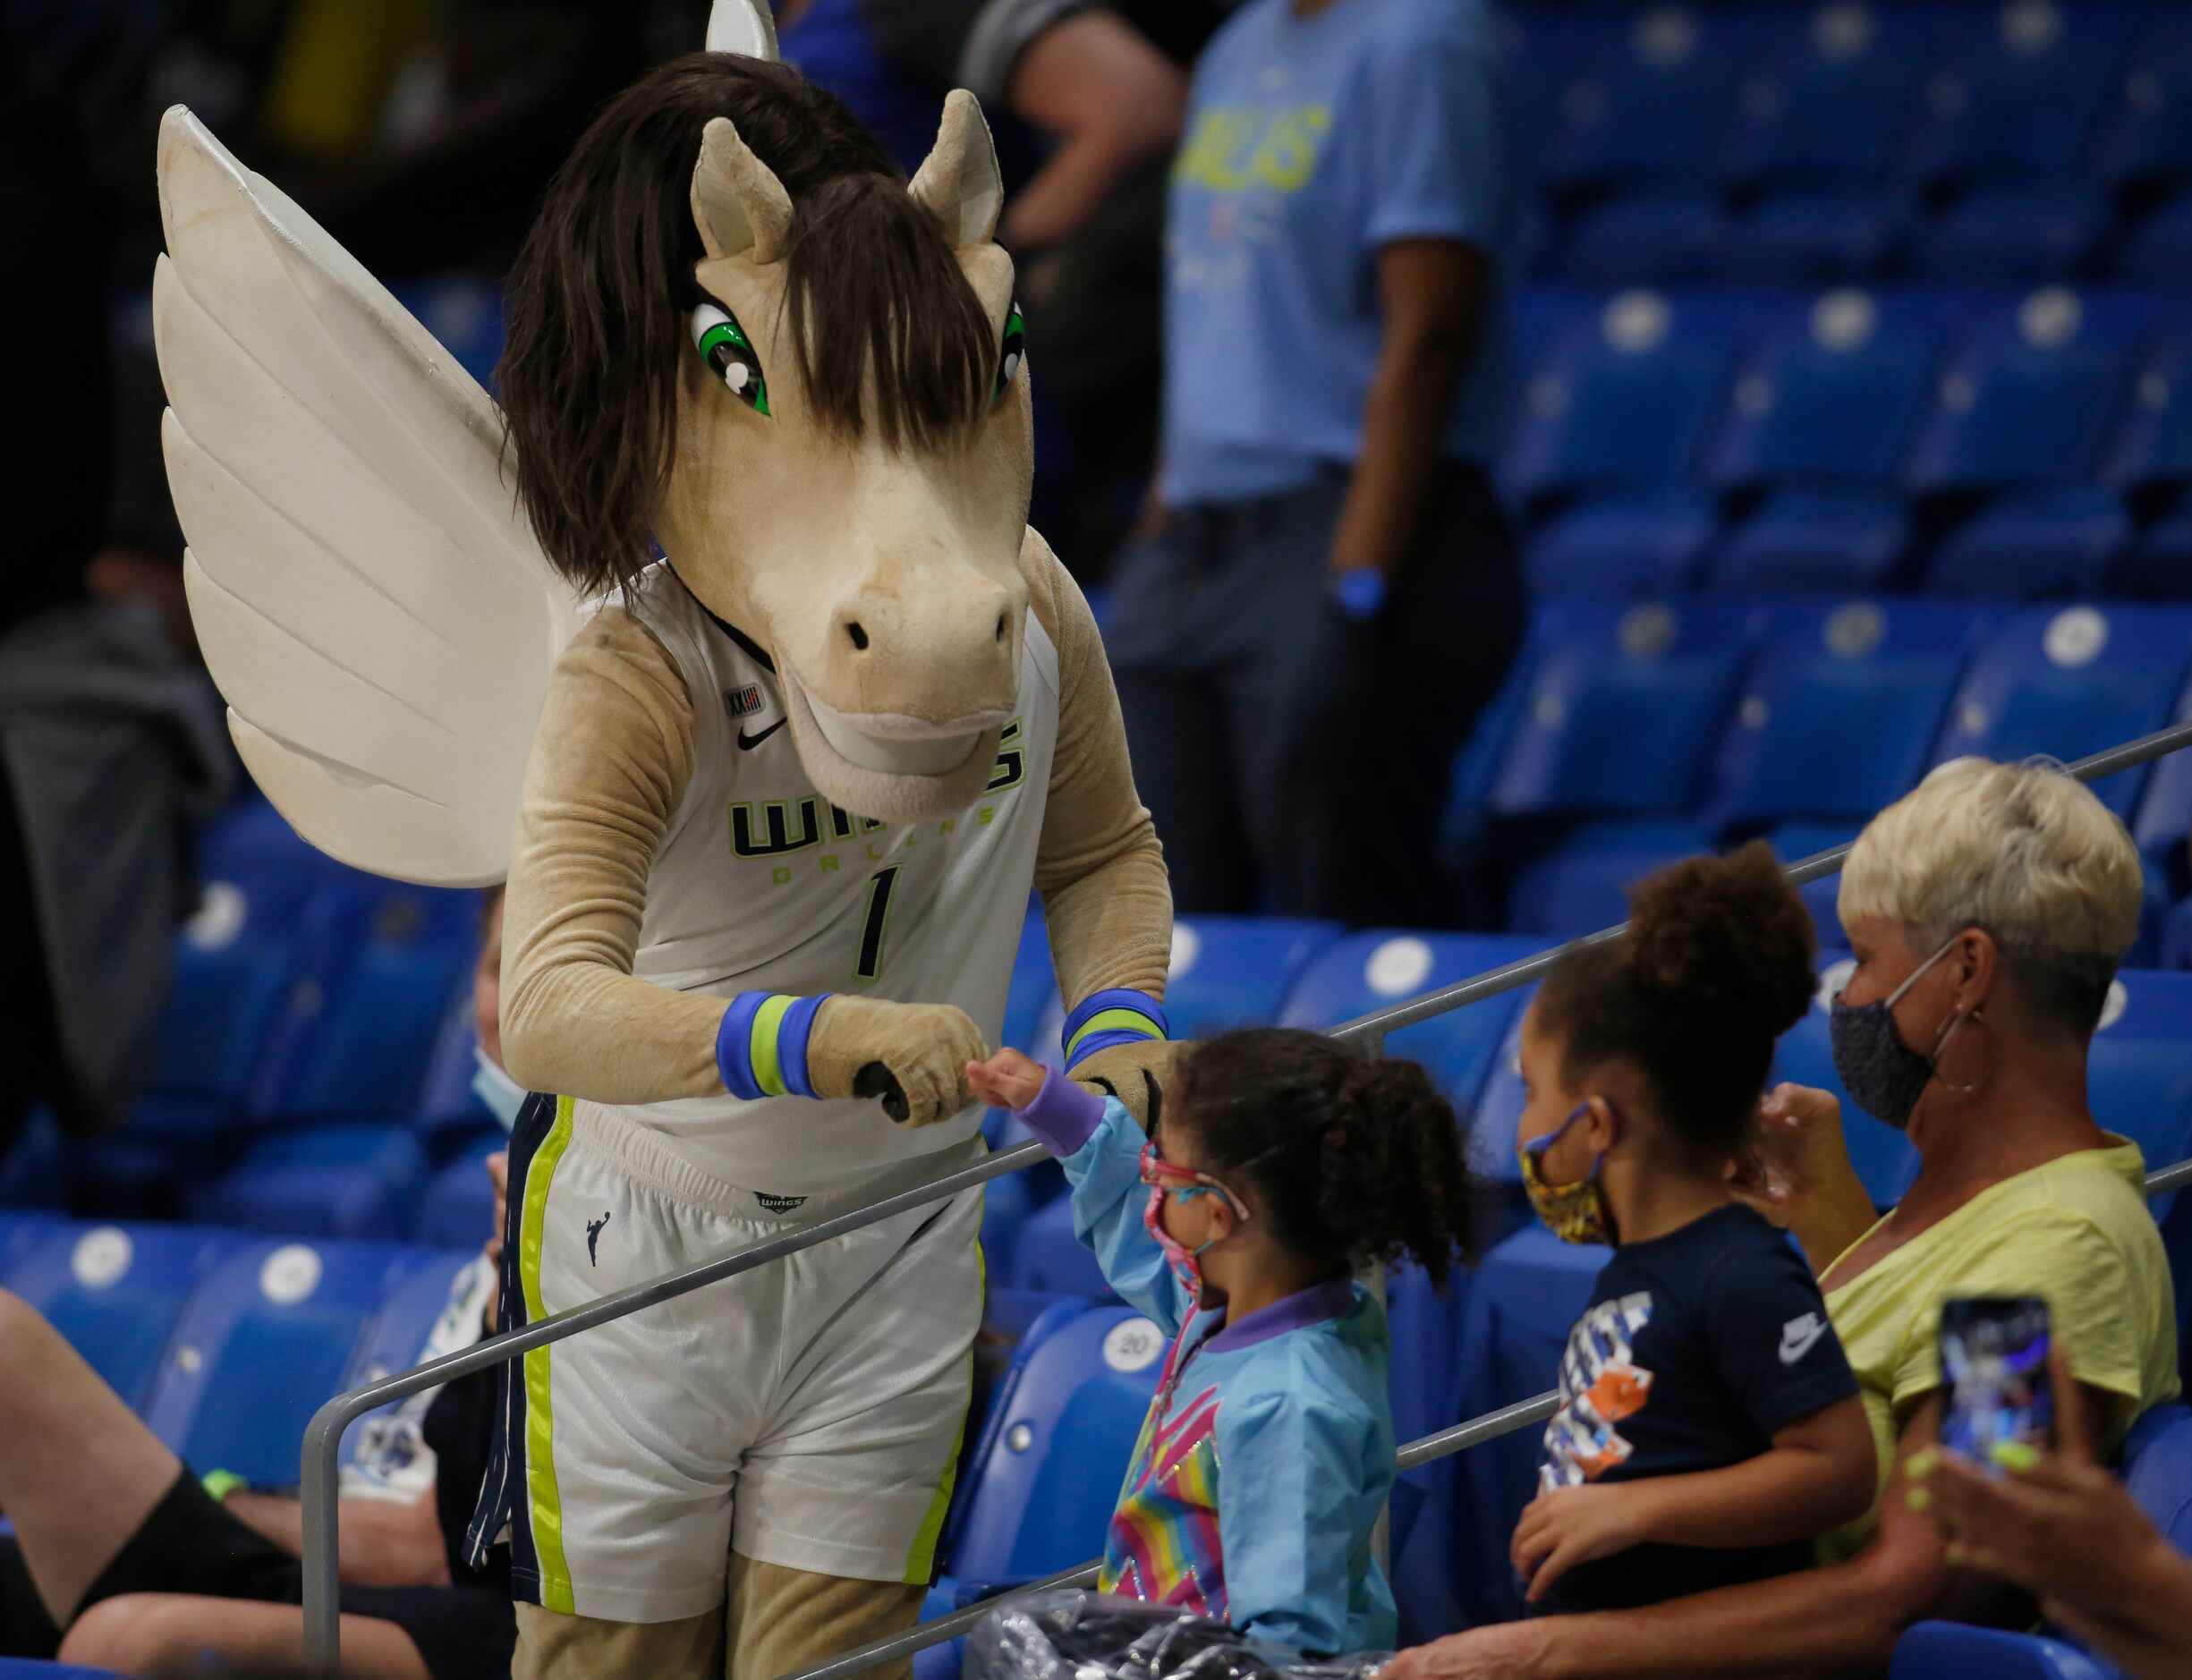 The Dallas Wings mascot shares a "fist bump" with a young fan in the crowd during second...